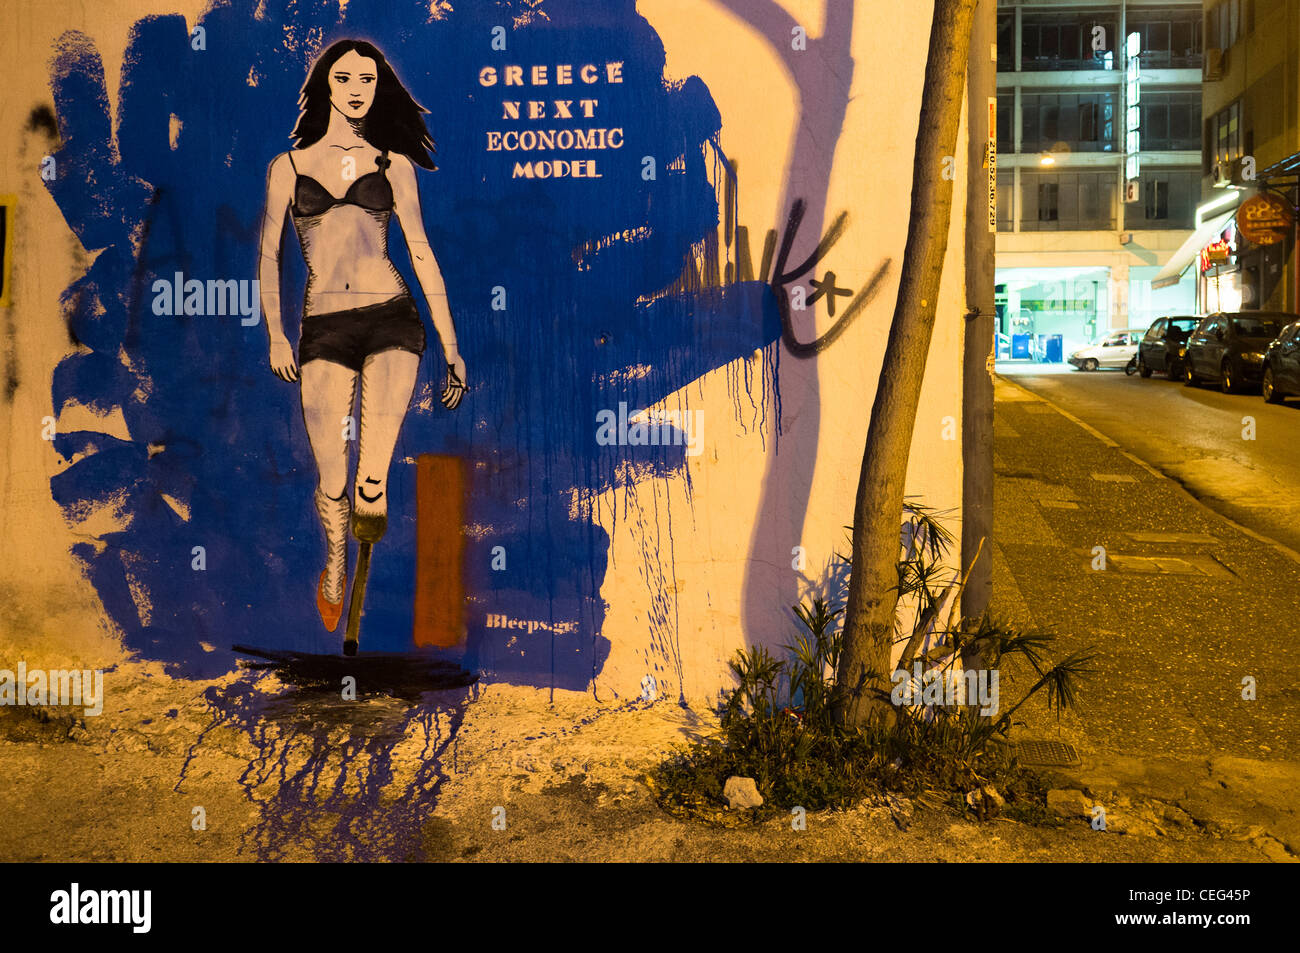 'Greece next economic model', mural, wall painting, Athens, Greece, Europe Stock Photo